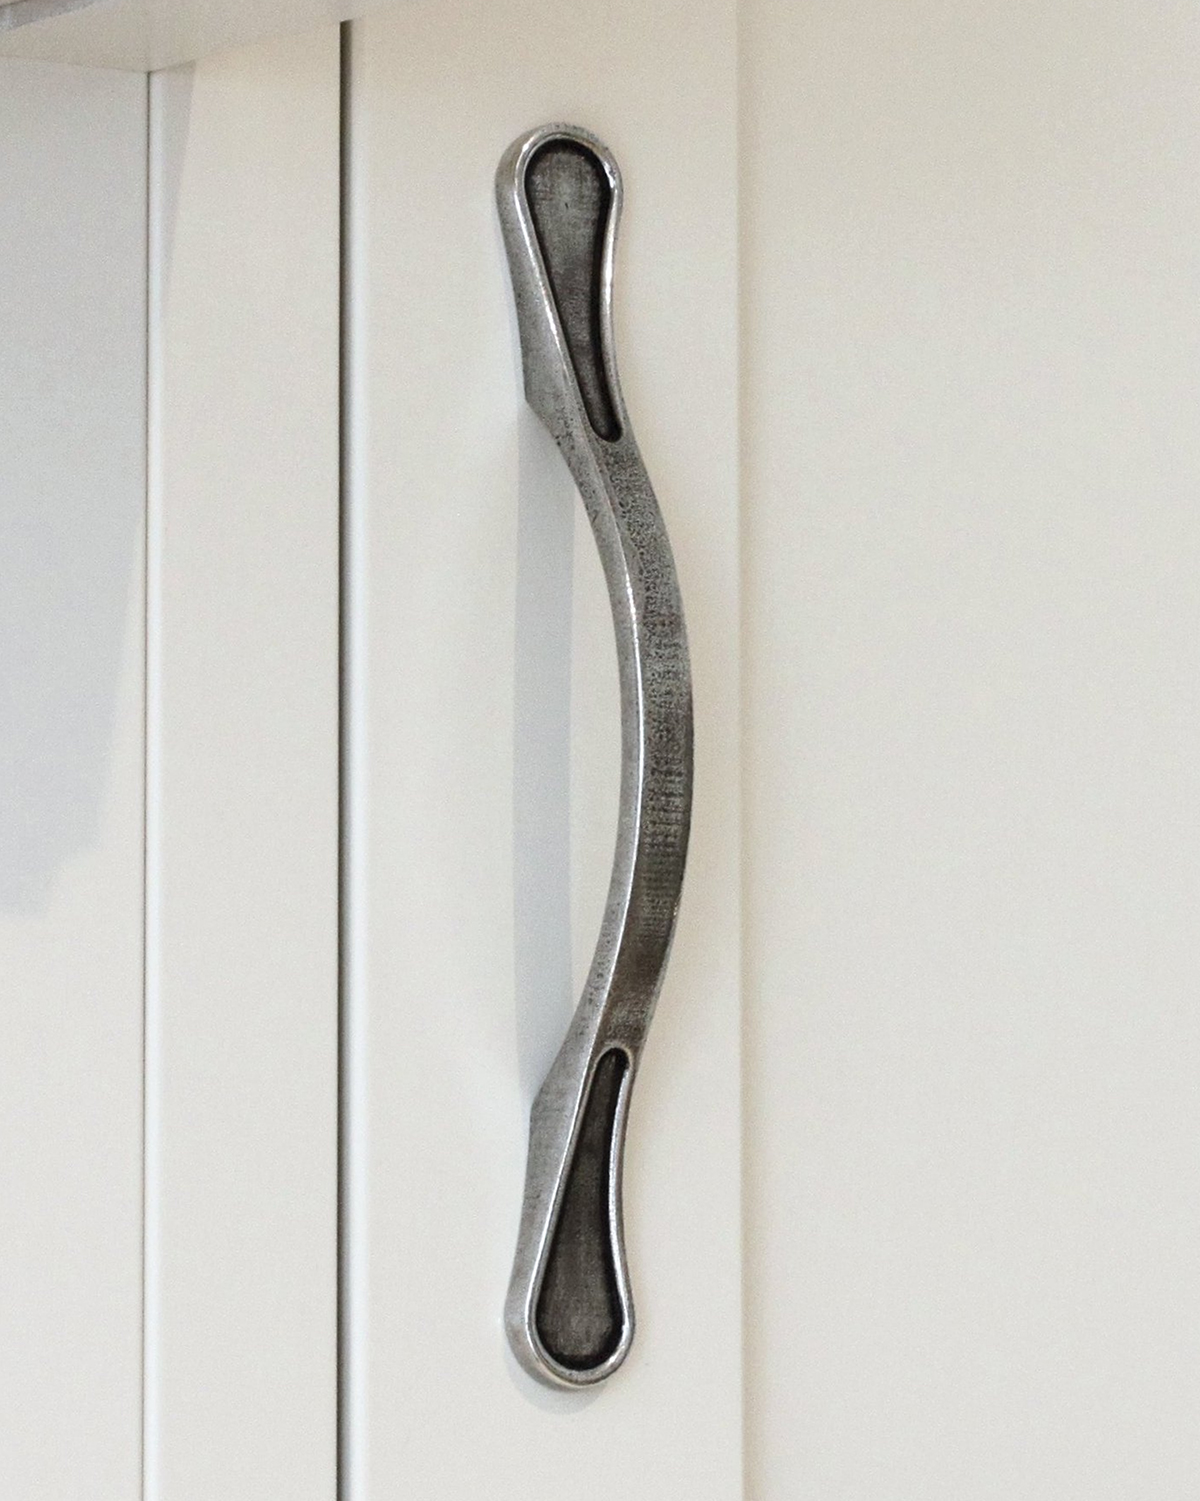 Pewter kitchen handle on white cupboard doors